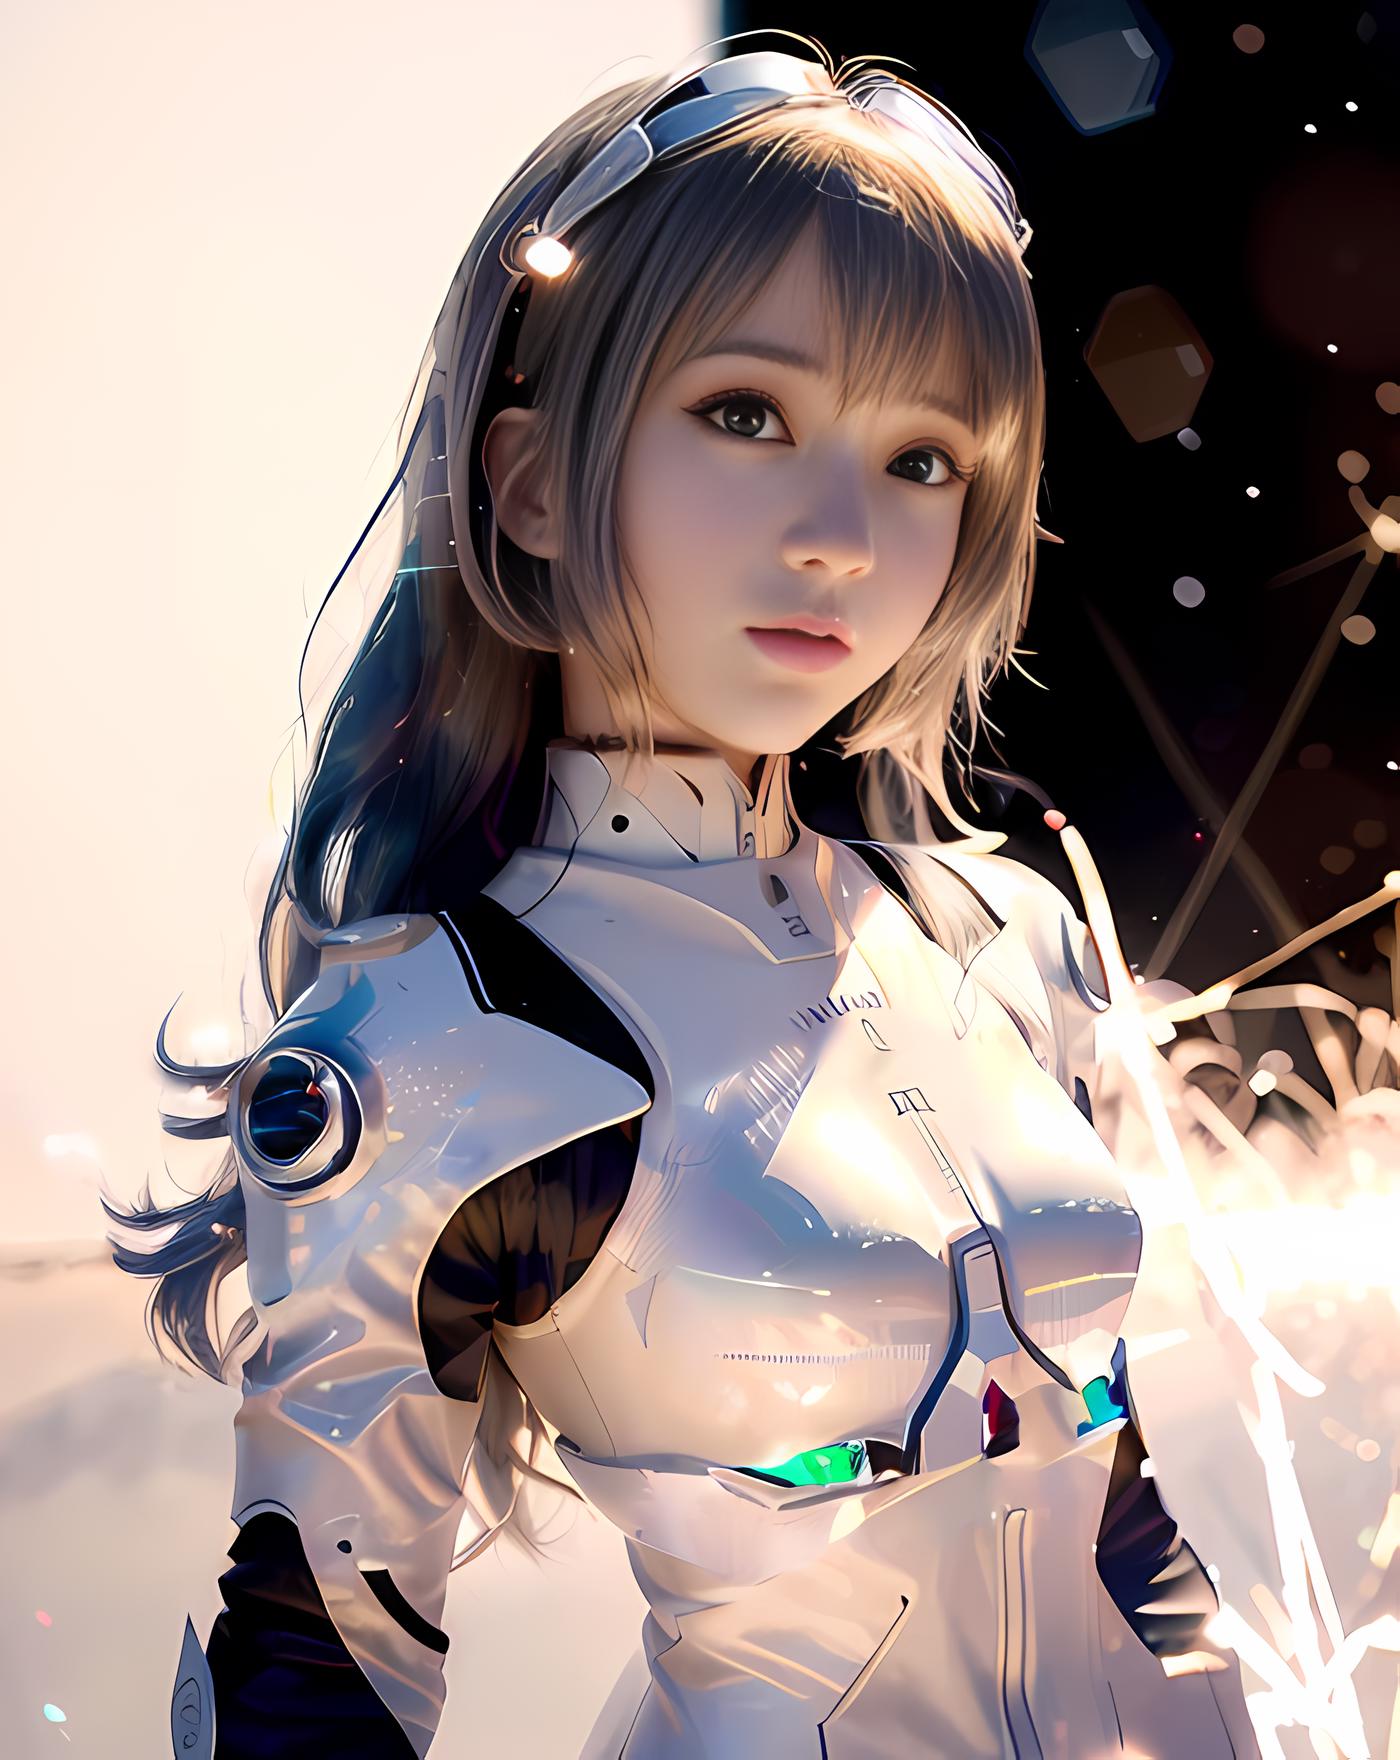 AI model image by acgert1215